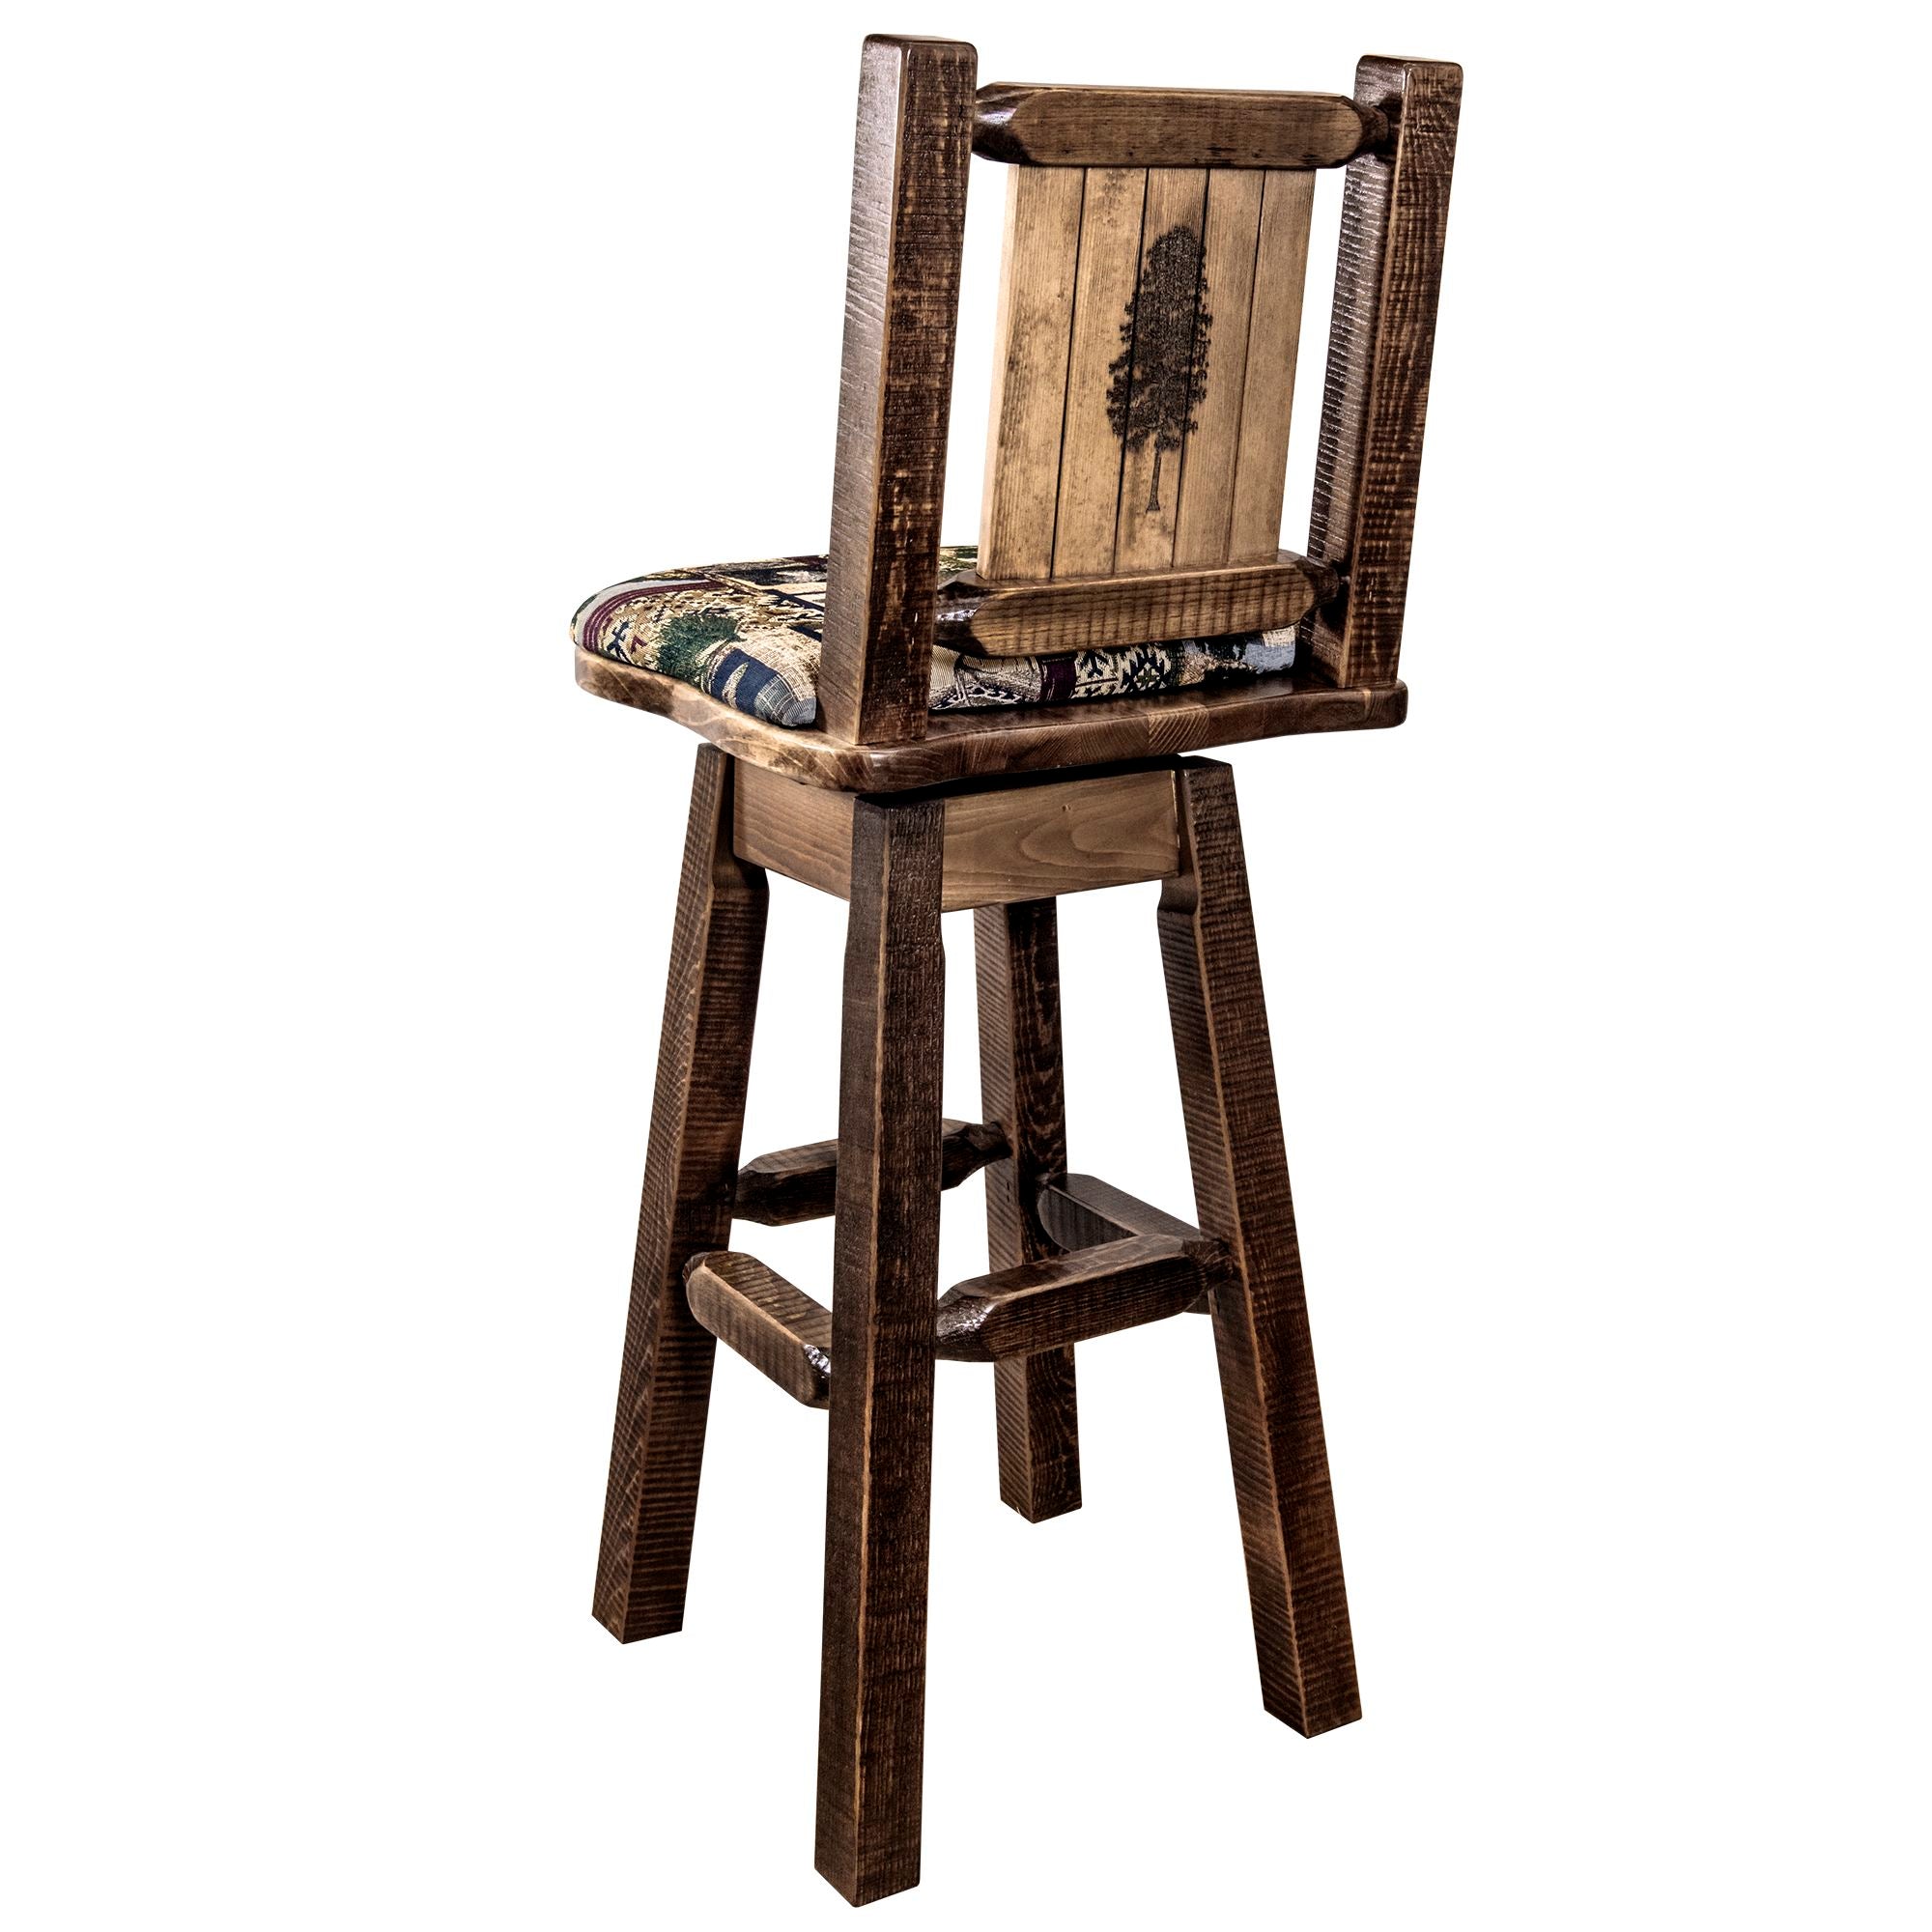 montana woodworks homestead collection barstool with back and swivel woodland pattern upholstery and laser engraved pine design mwhcbswsnrslpine